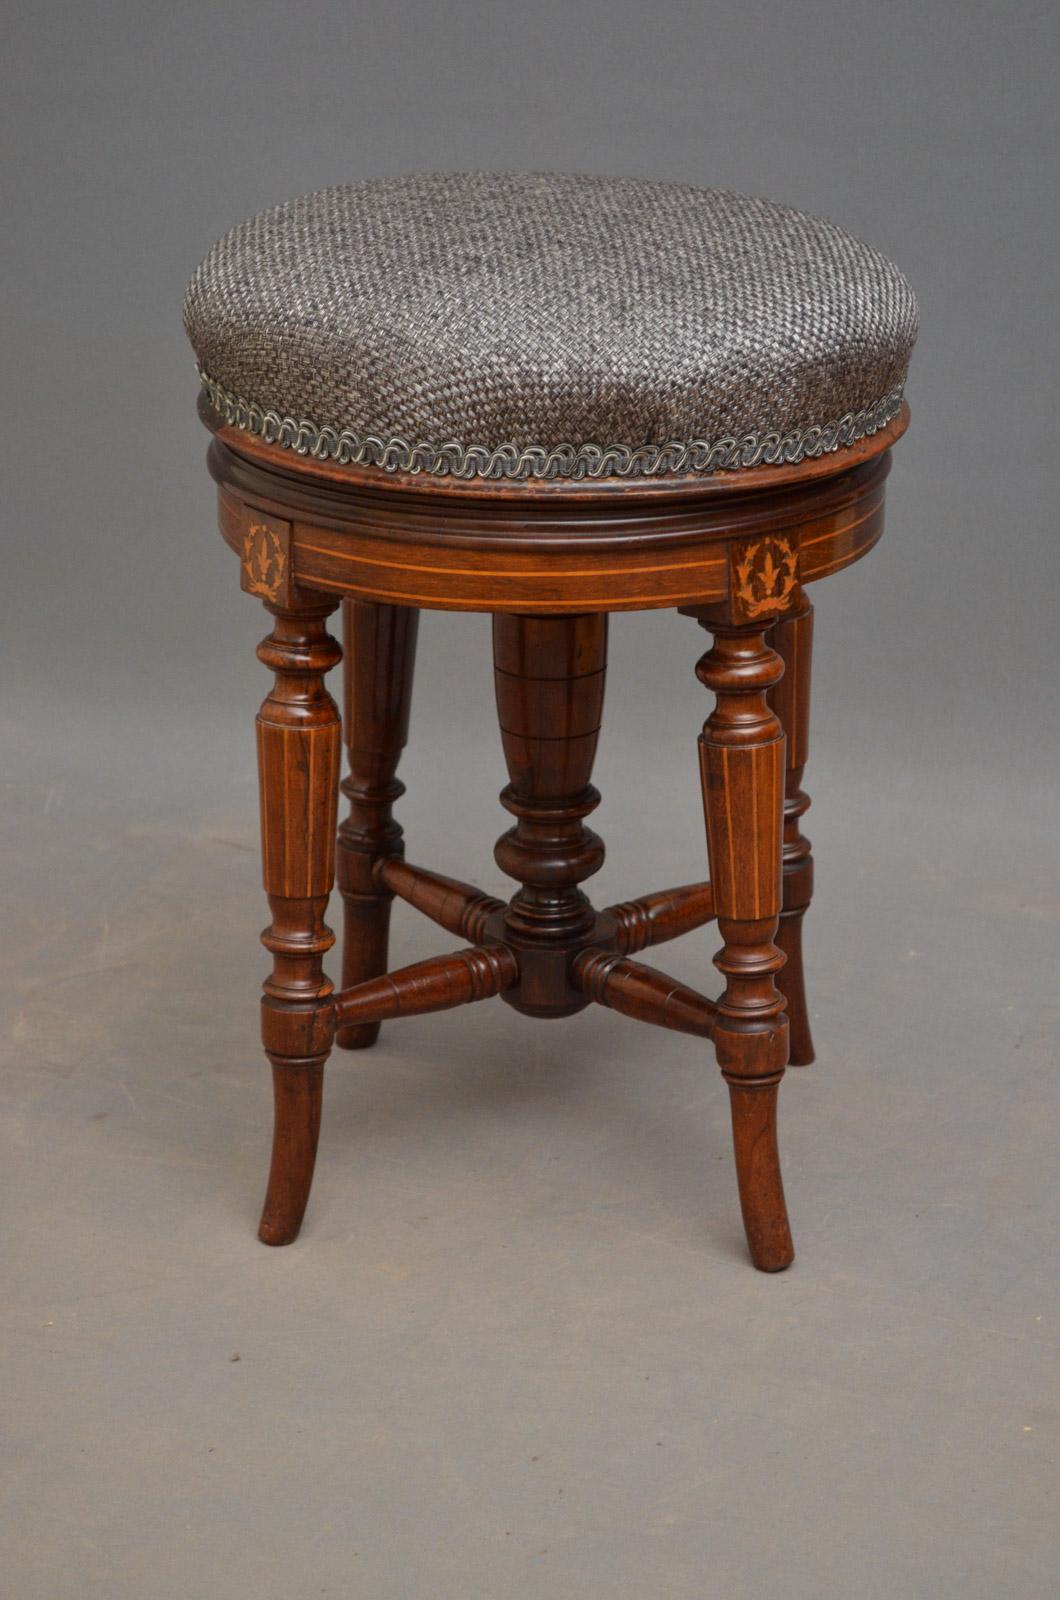 Sn3626 Victorian mahogany and inlaid dressing stool, having height adjustable seat and satinwood string inlaid legs united by stretchers, all in excellent condition throughout, ready to place at home, circa 1870.
Measures: Height 18